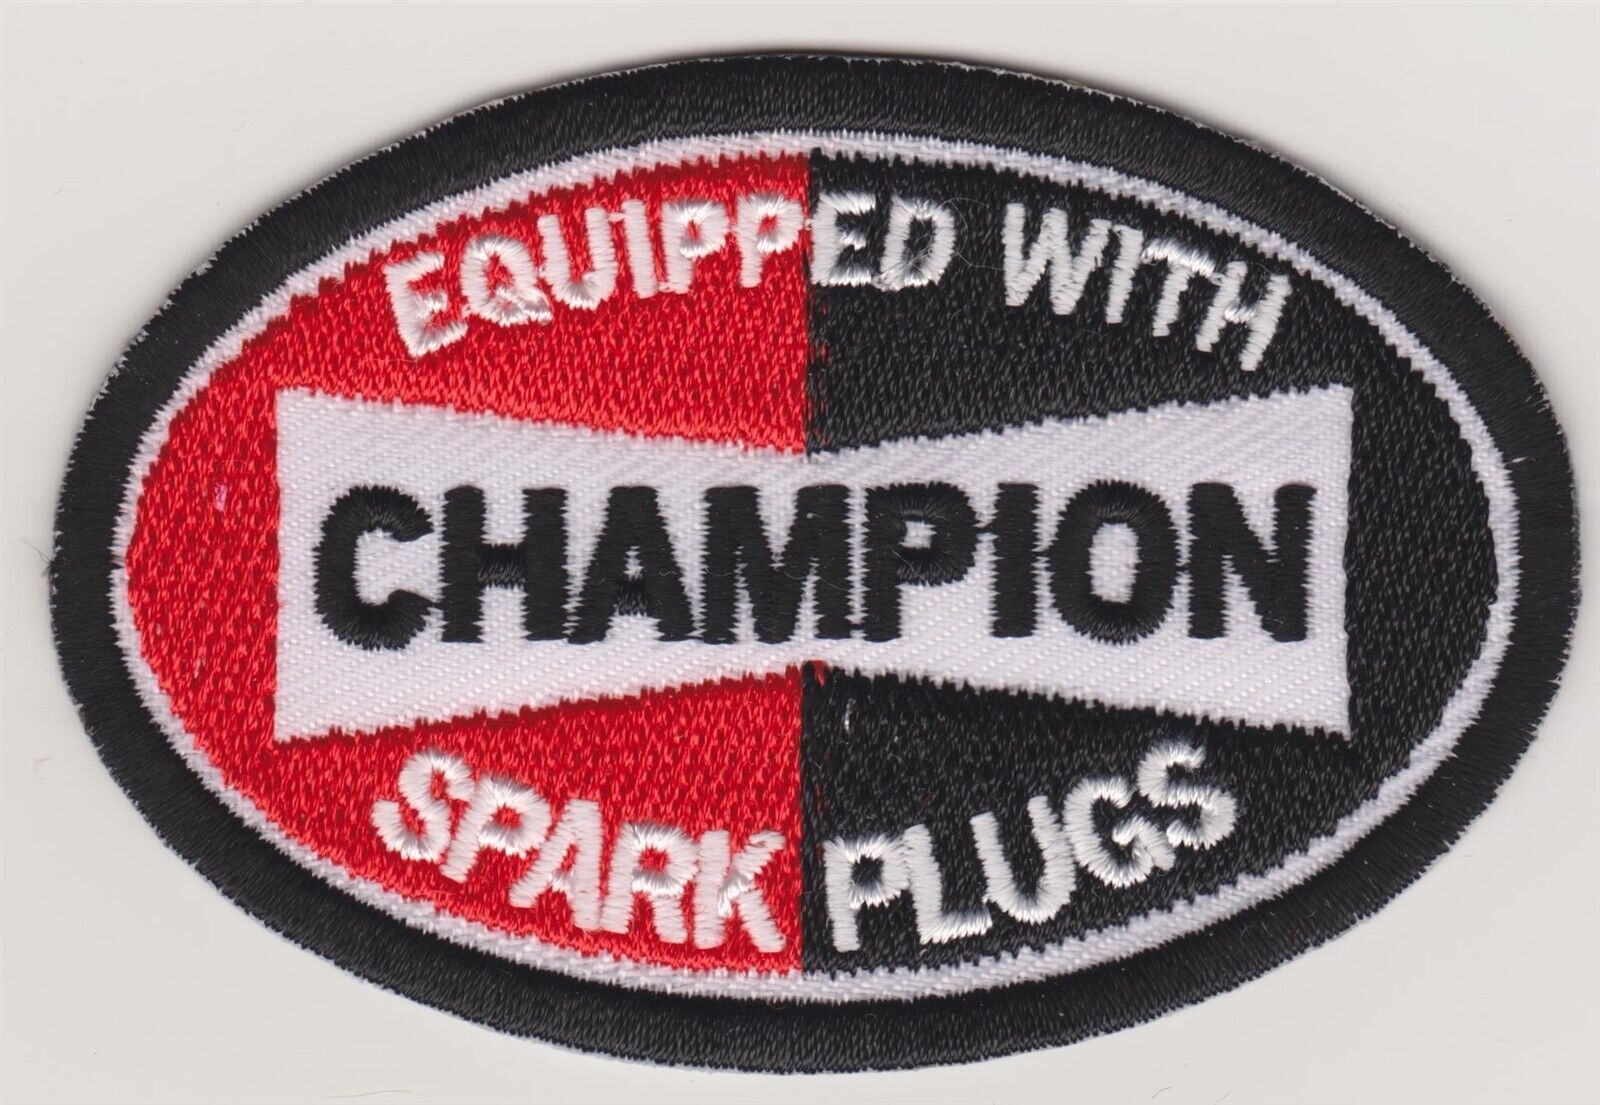 Equipped With Champion Spark Plugs Embroidered Iron On Car Patch *New* #299